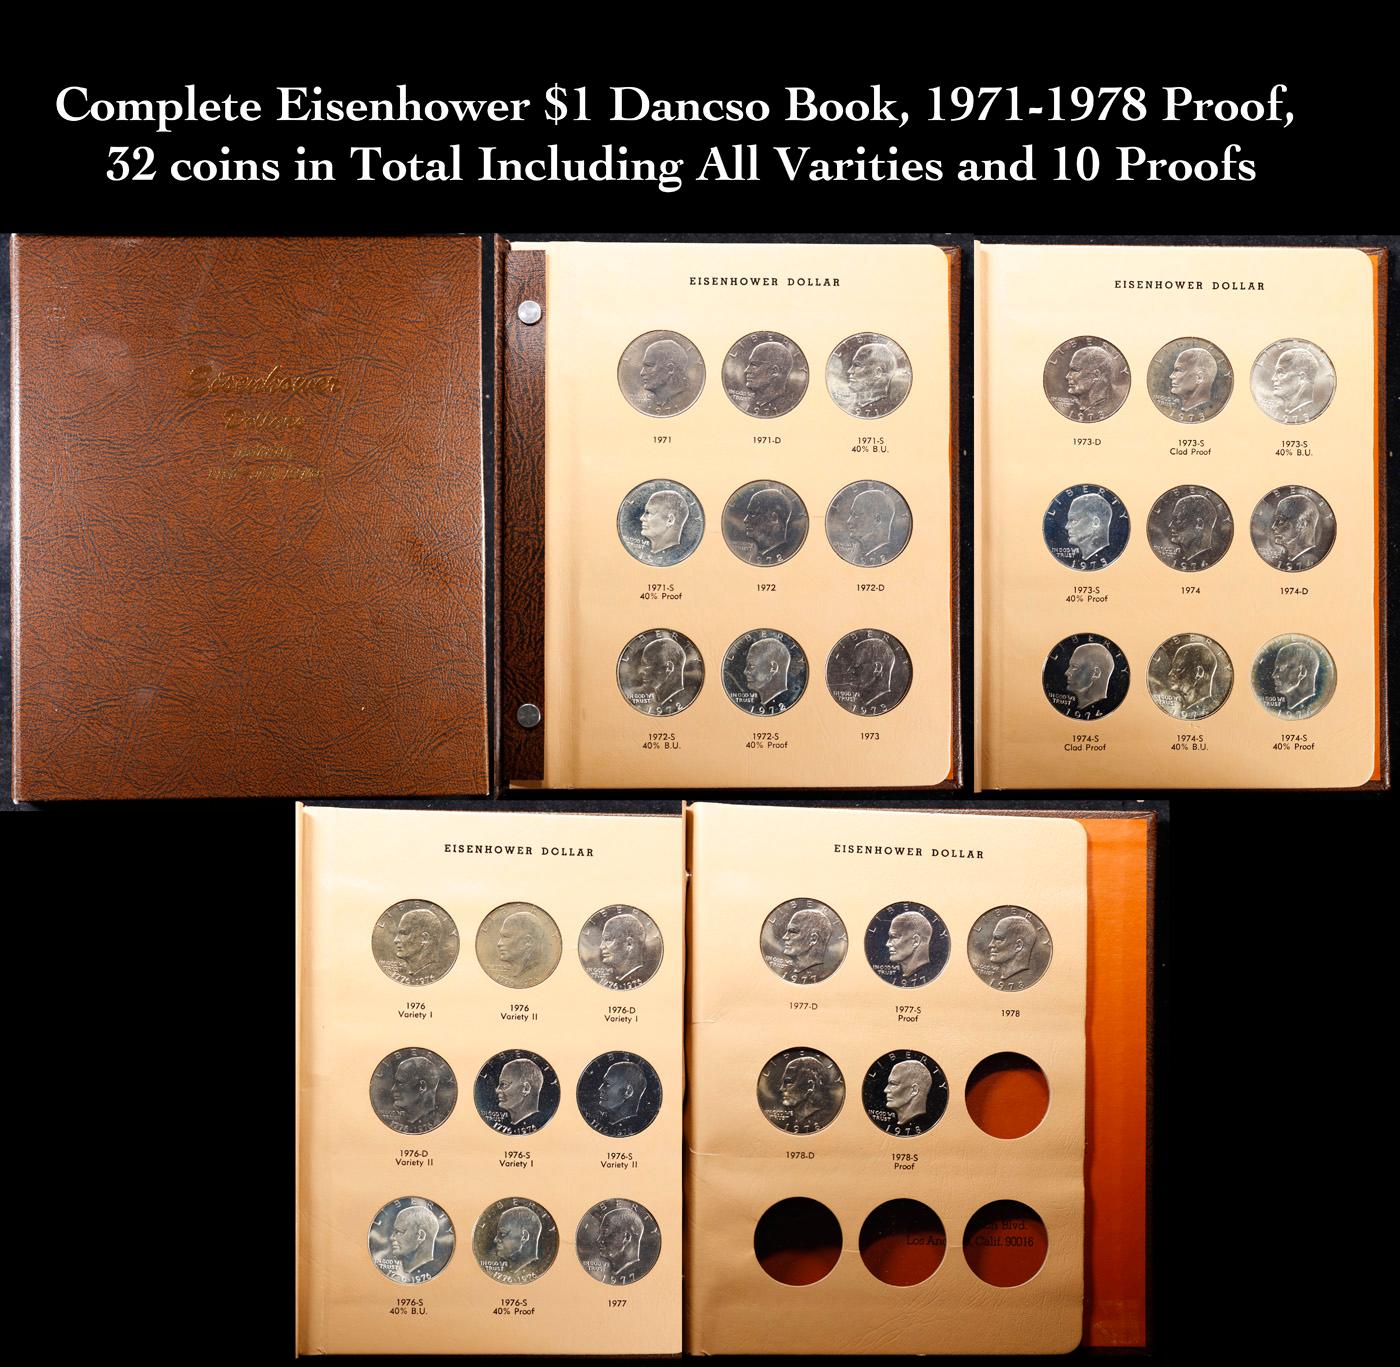 Complete Eisenhower $1 Dancso Book, 1971-1978 Proof, 32 coins in Total Including All Varities and 10